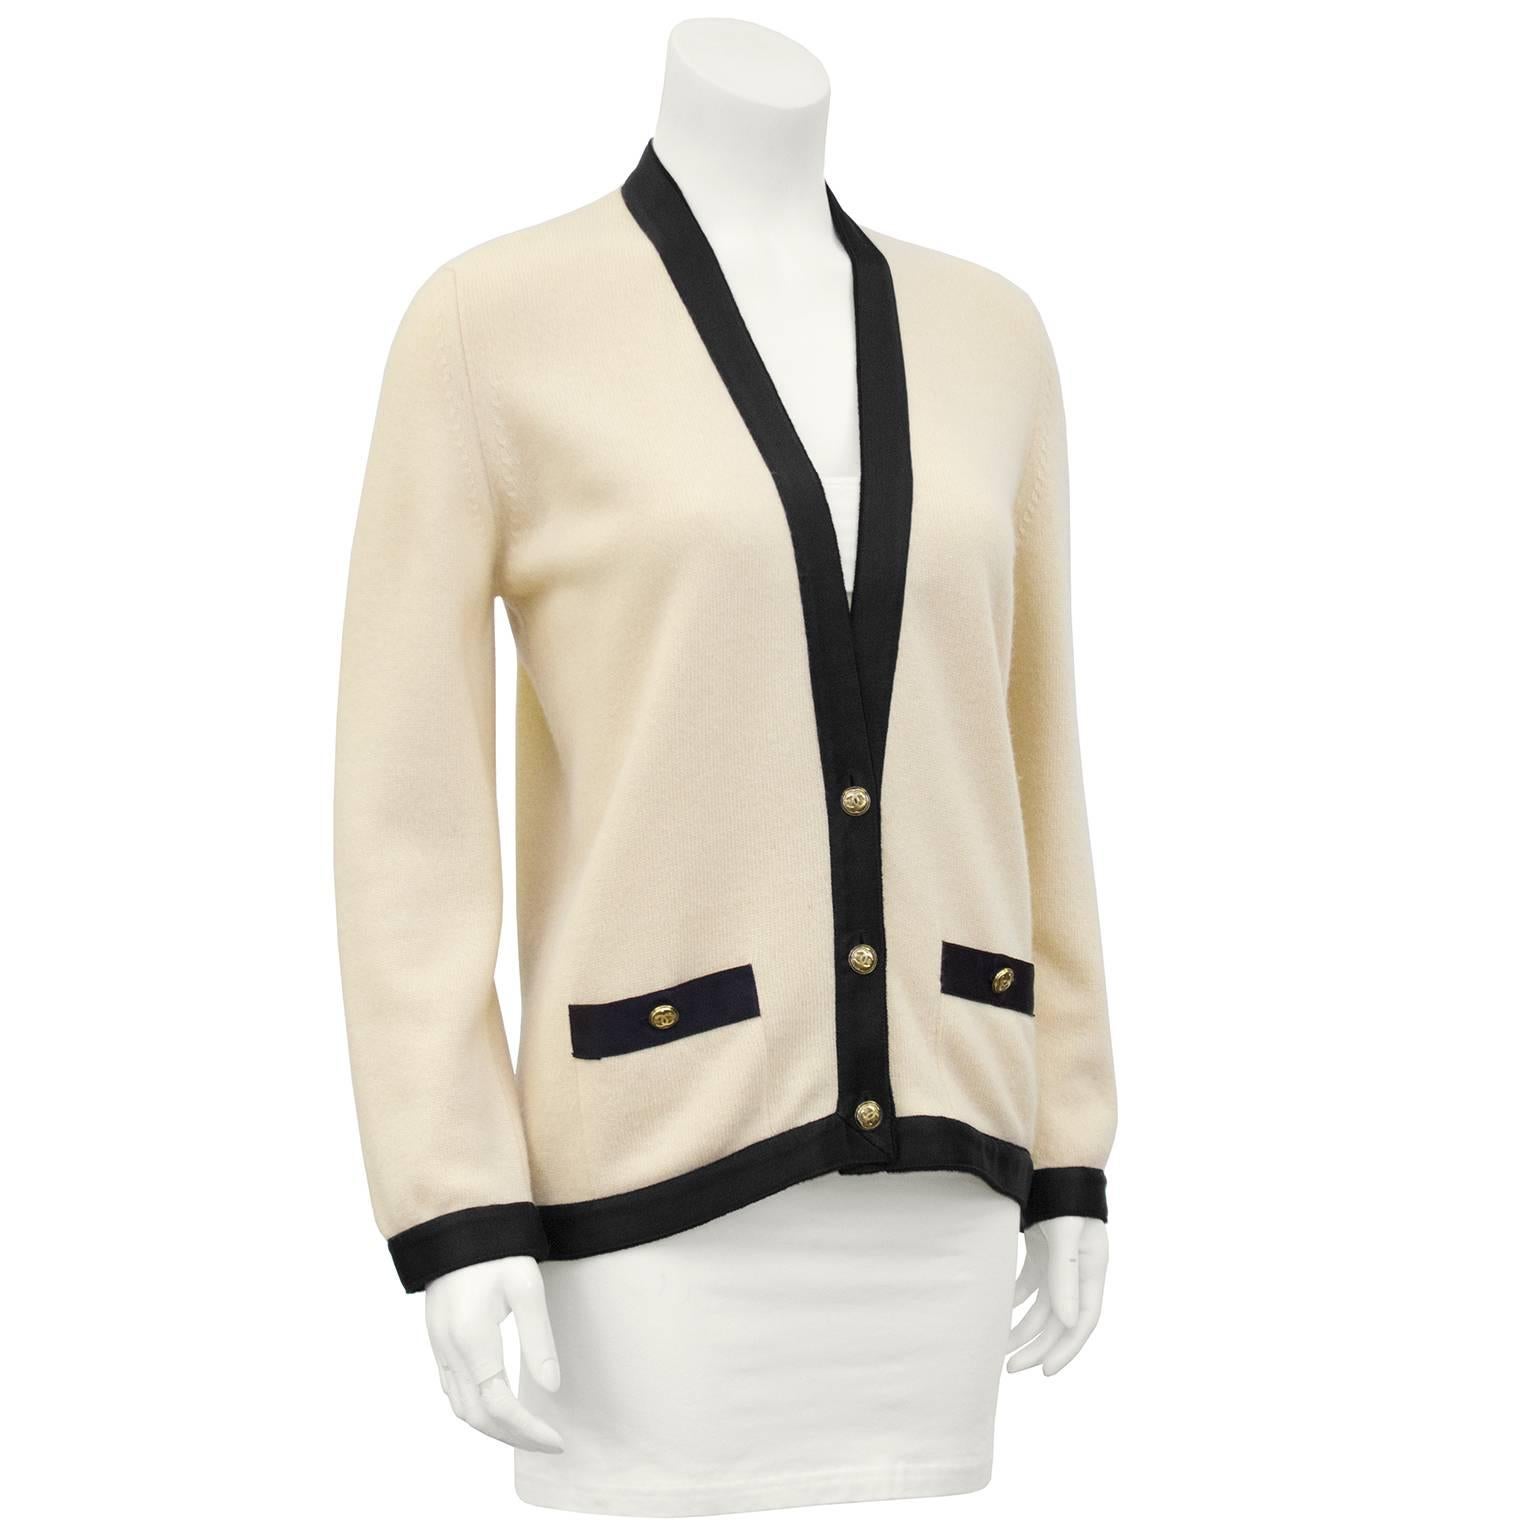 1990s Classic Chanel cream cashmere cardigan with black silk ribbon trim. Gold/brass tone cc logo buttons. Slit pockets at hips. Quintessential Chanel piece, easy and chic. Excellent vintage condition. Fits like a US 6. 

Sleeve 22" Shoulder